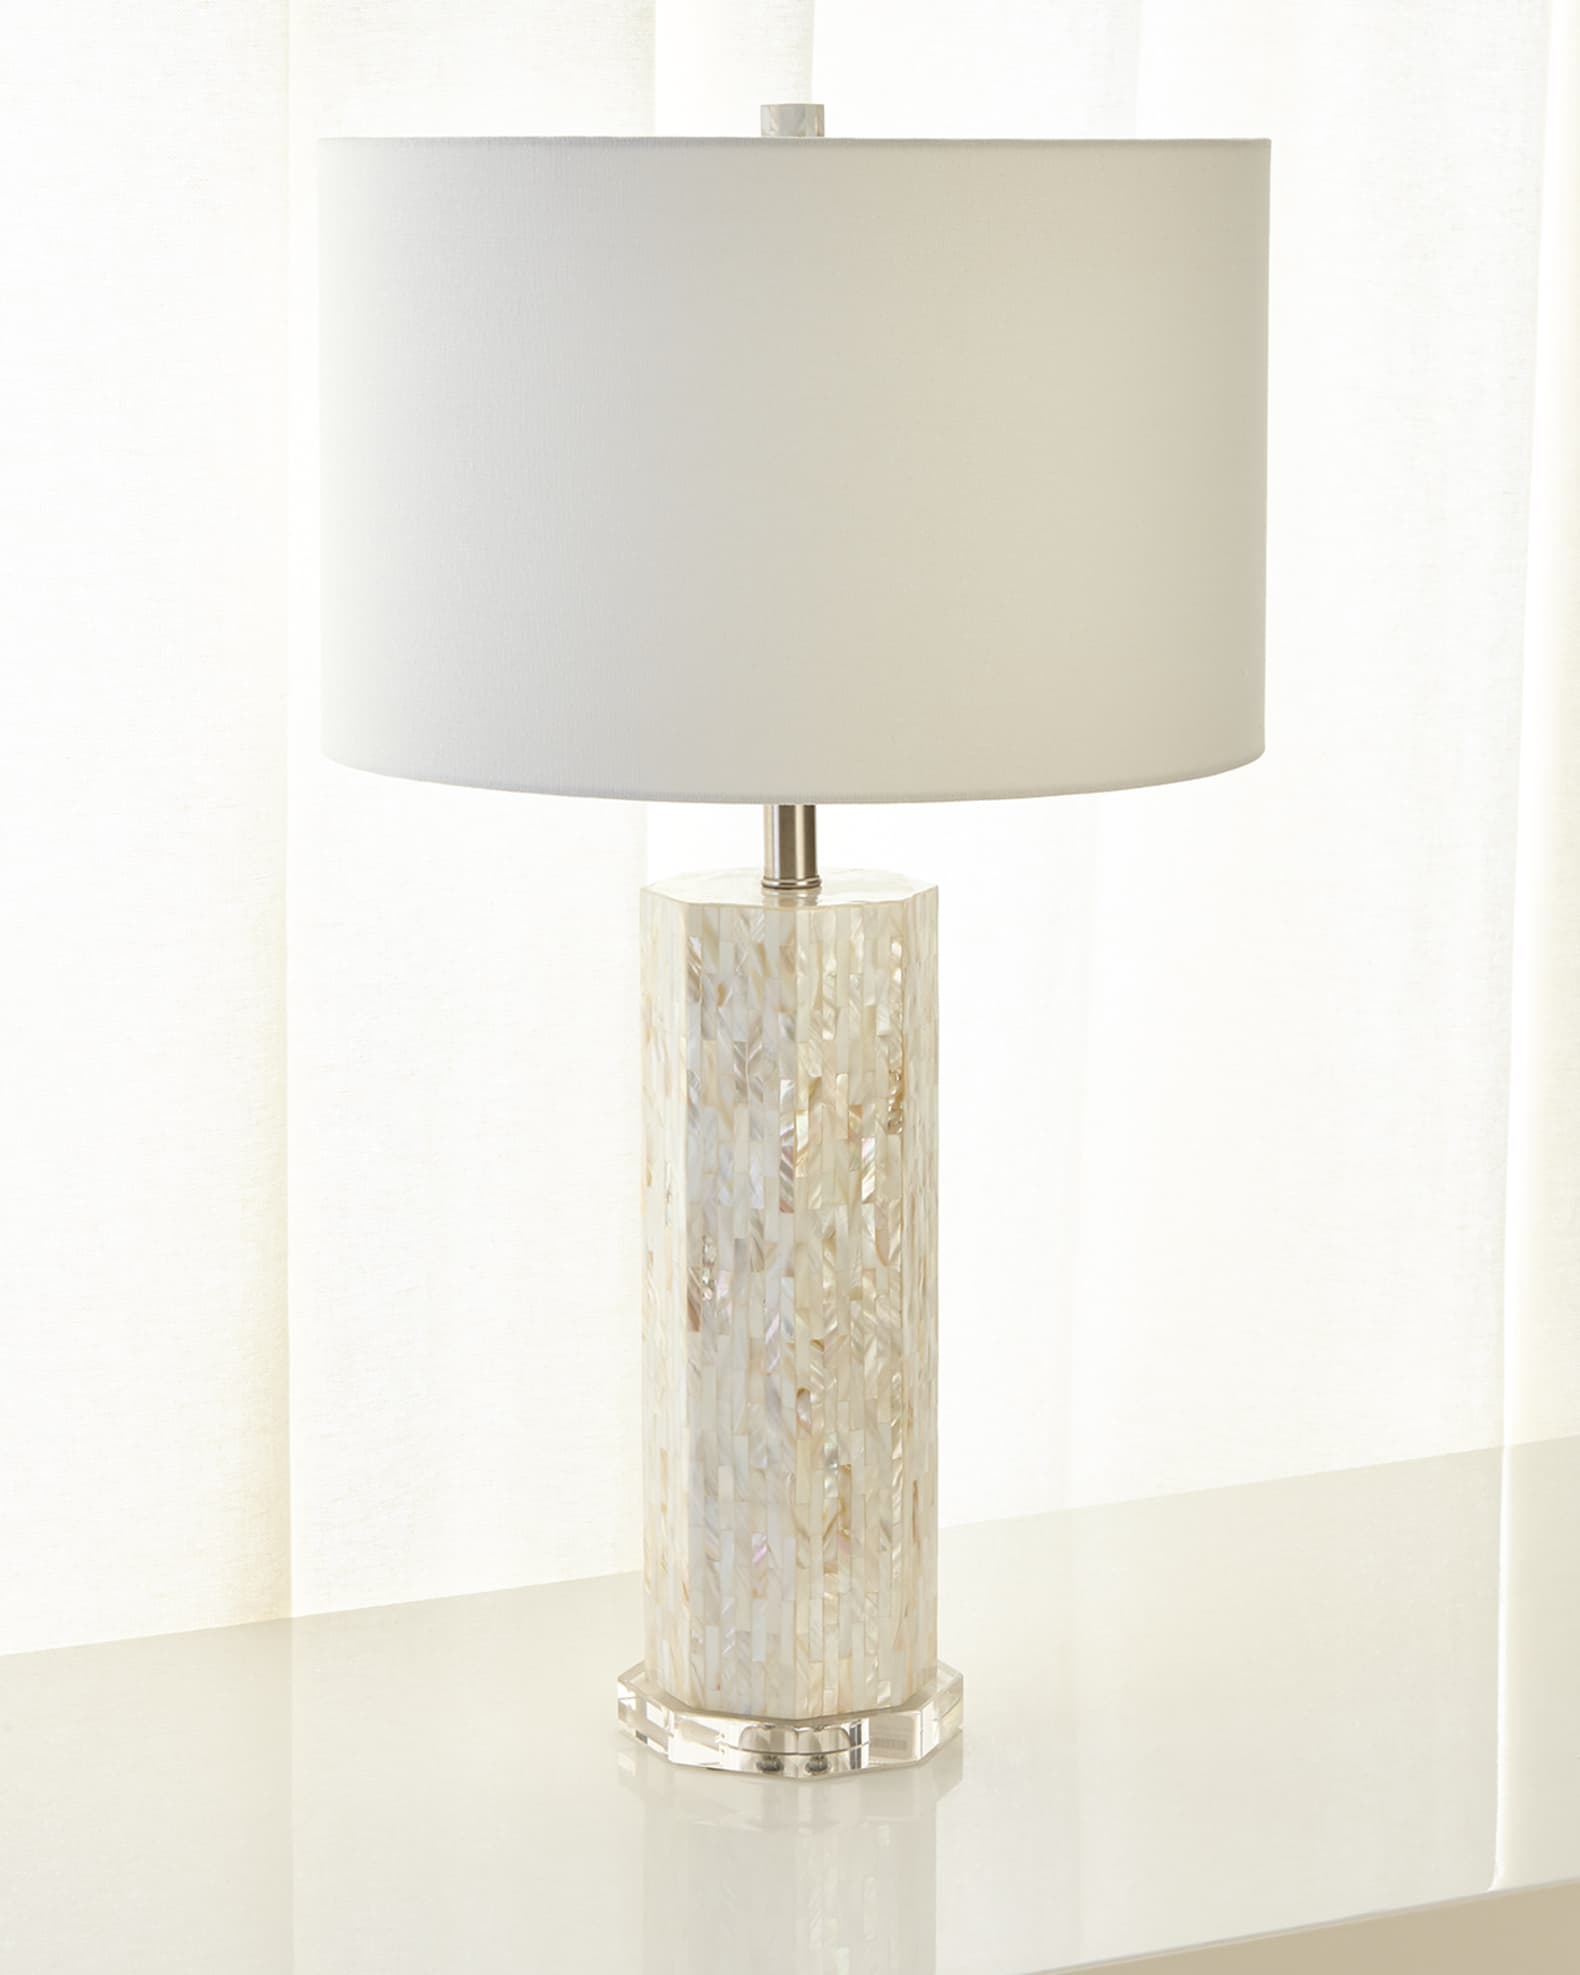 tsunamien beundring Tilstand Couture Lamps Octagonal Mother-of-Pearl Table Lamp | Horchow